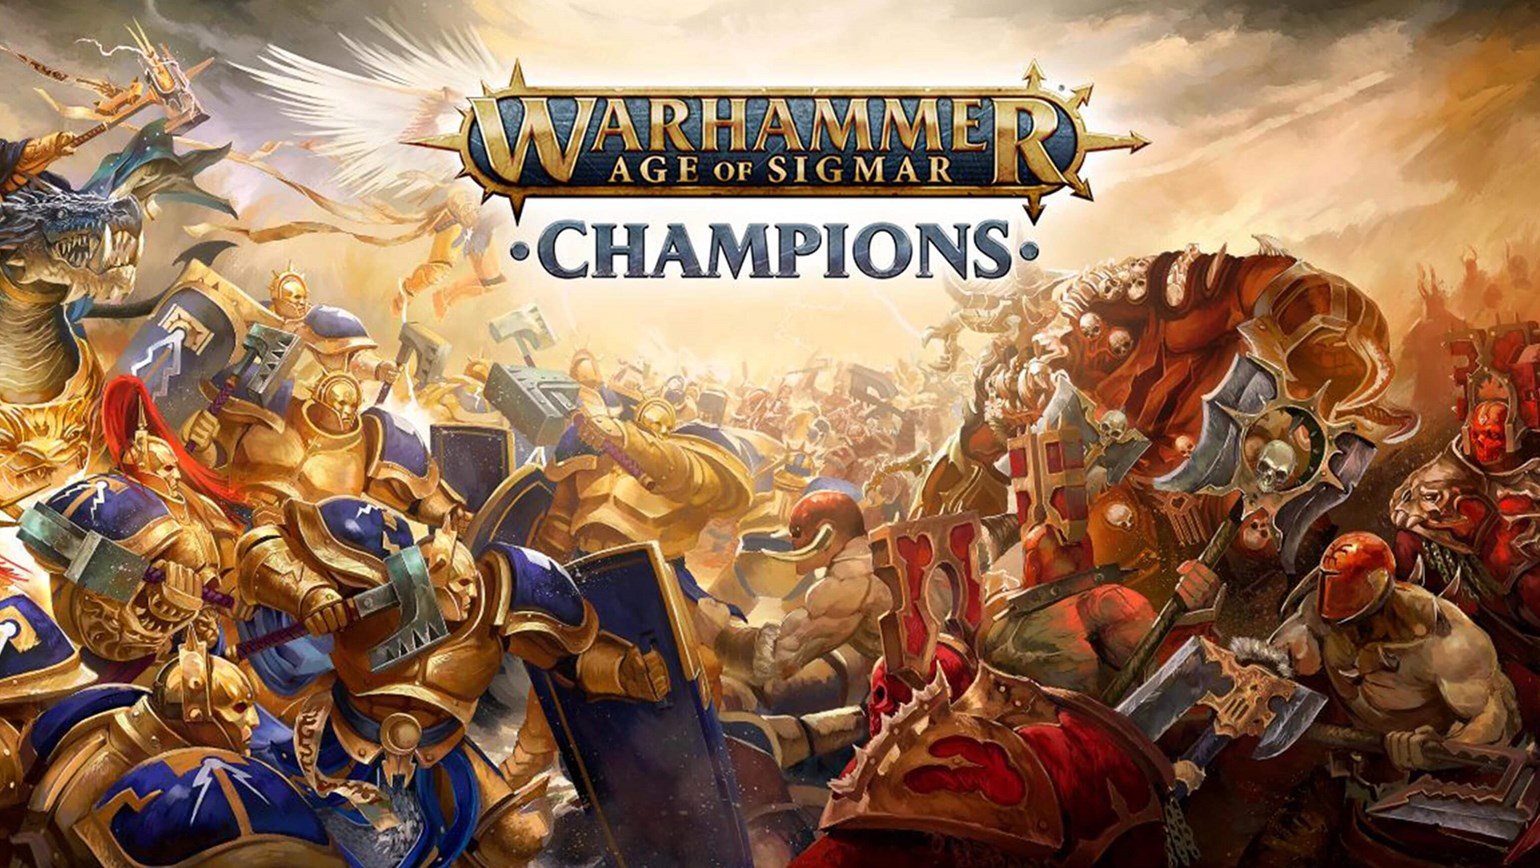 Warhammer Age of Sigmar: Champions from PlayFusion Arriving August 2nd